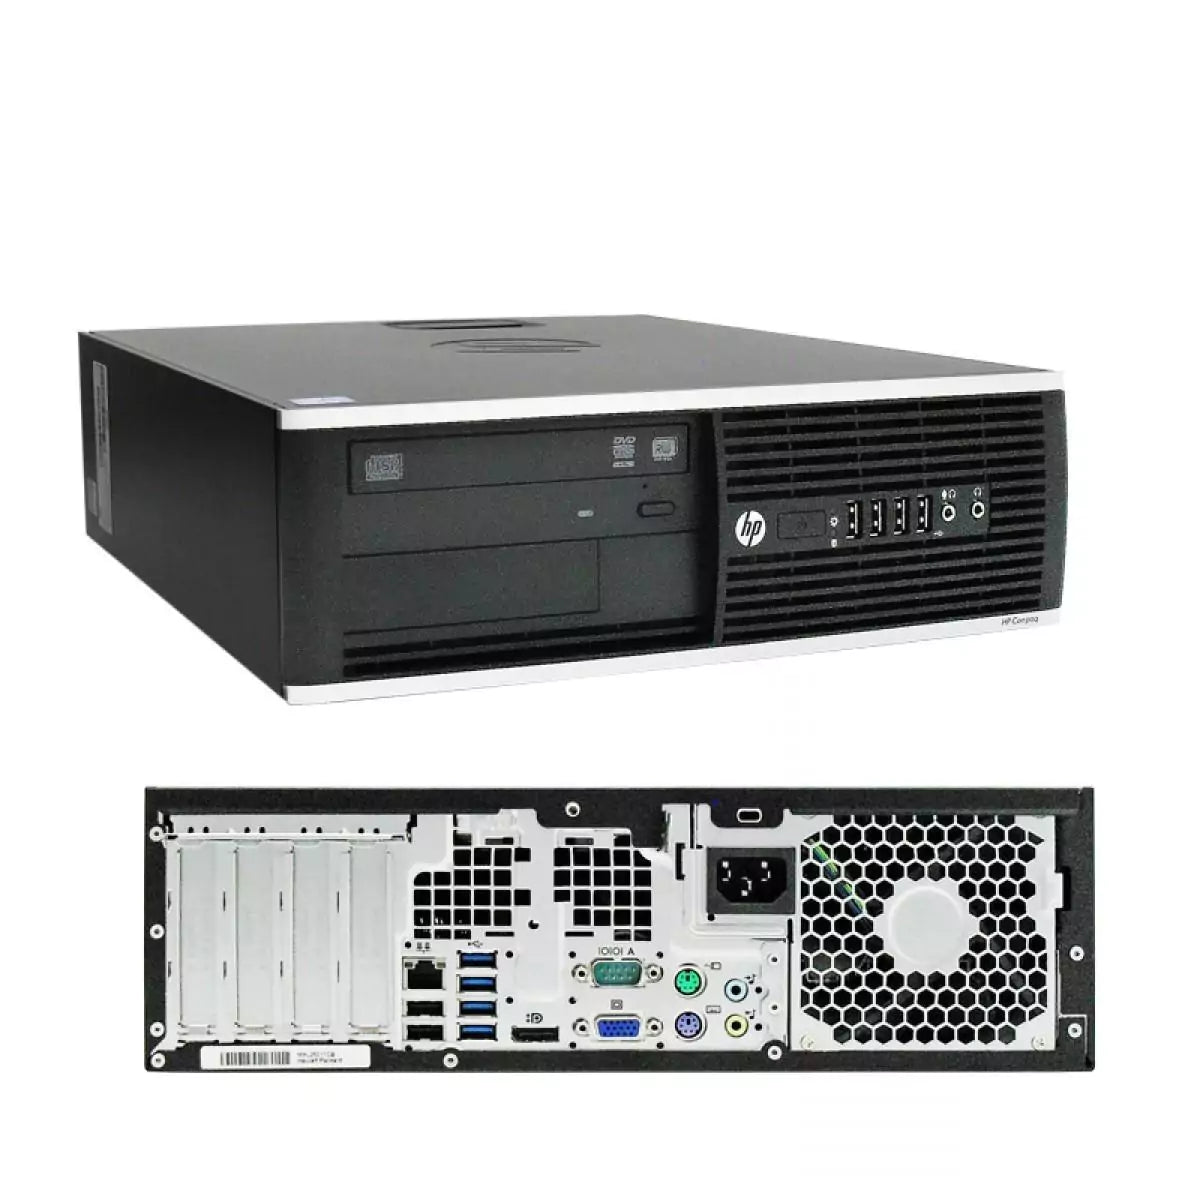 HP ELITE 8300 SFF | Intel Core i5-3470 3.2Ghz | Ram 8Gb | SSD 256Gb | Windows 10 Pro The compact and functional PC for work